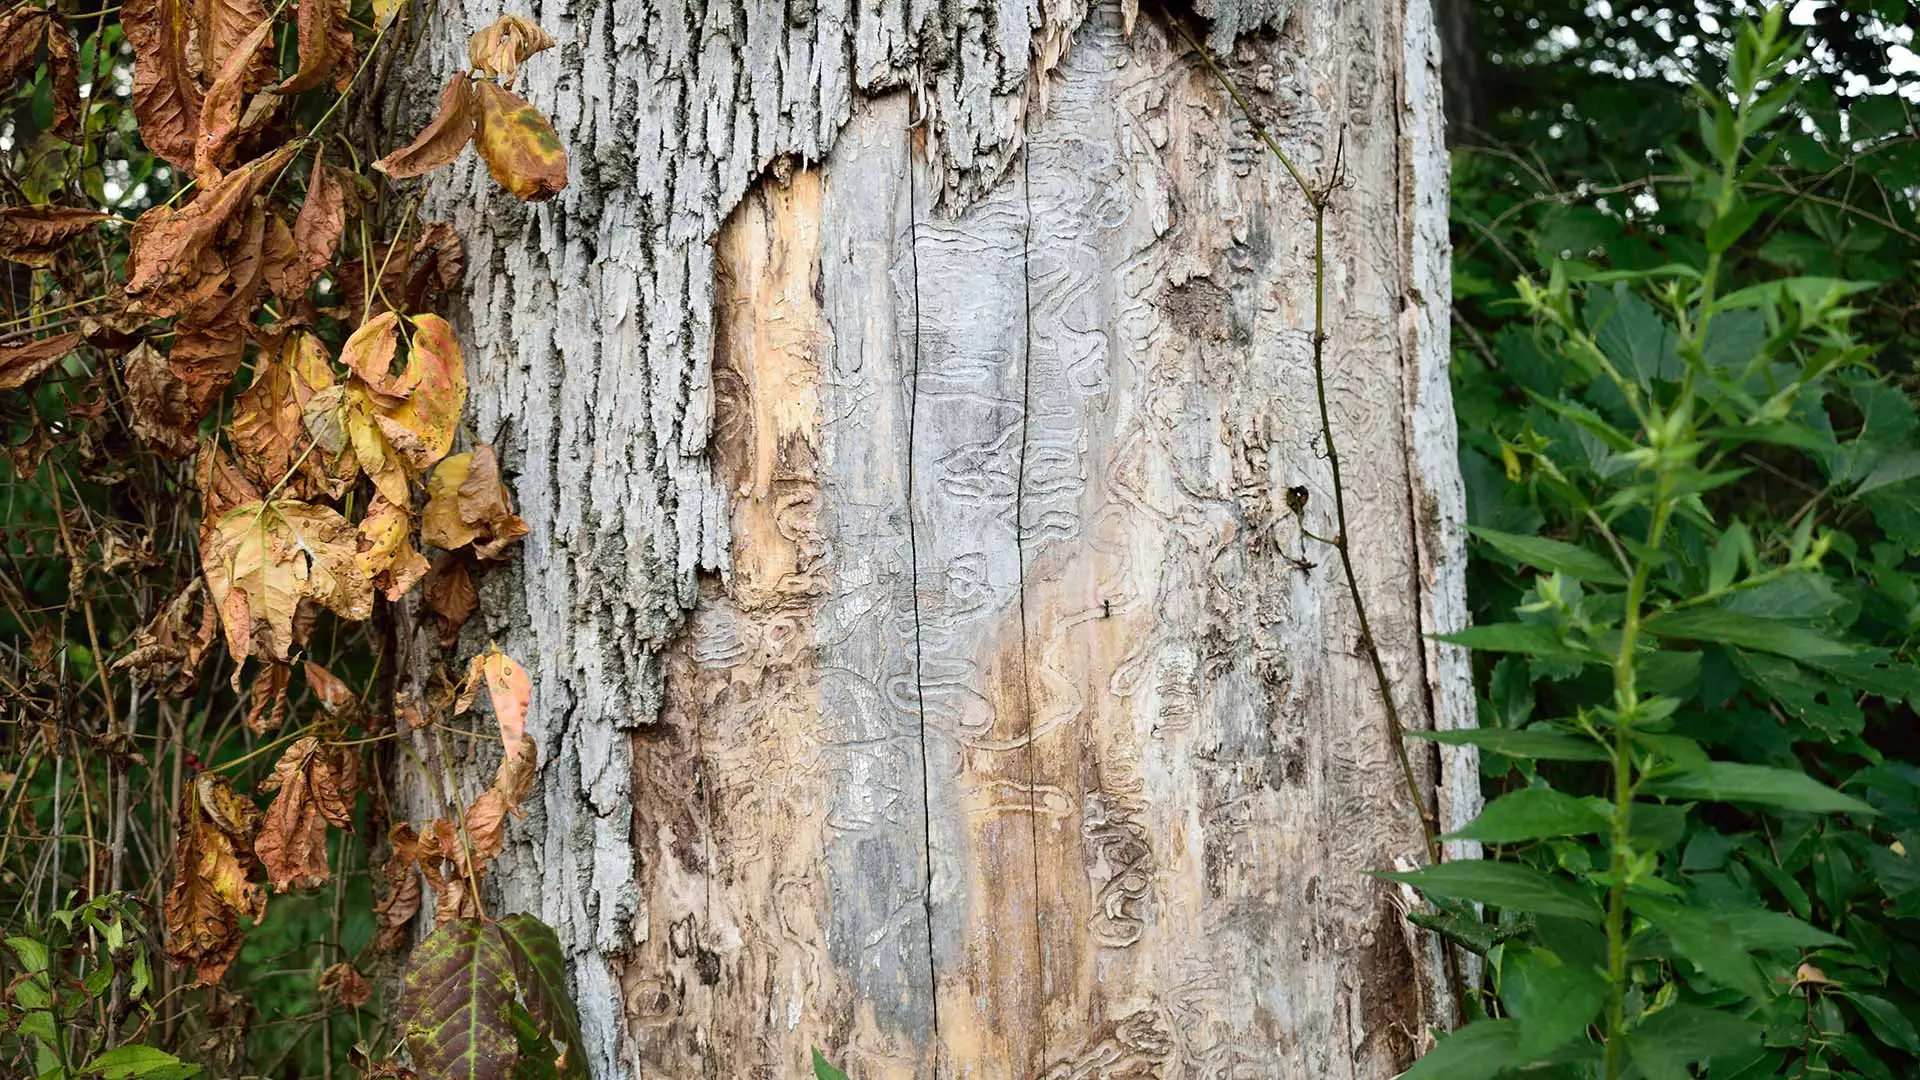 Emerald Ash Borer Damage is Deadly - Here’s How to Prevent it